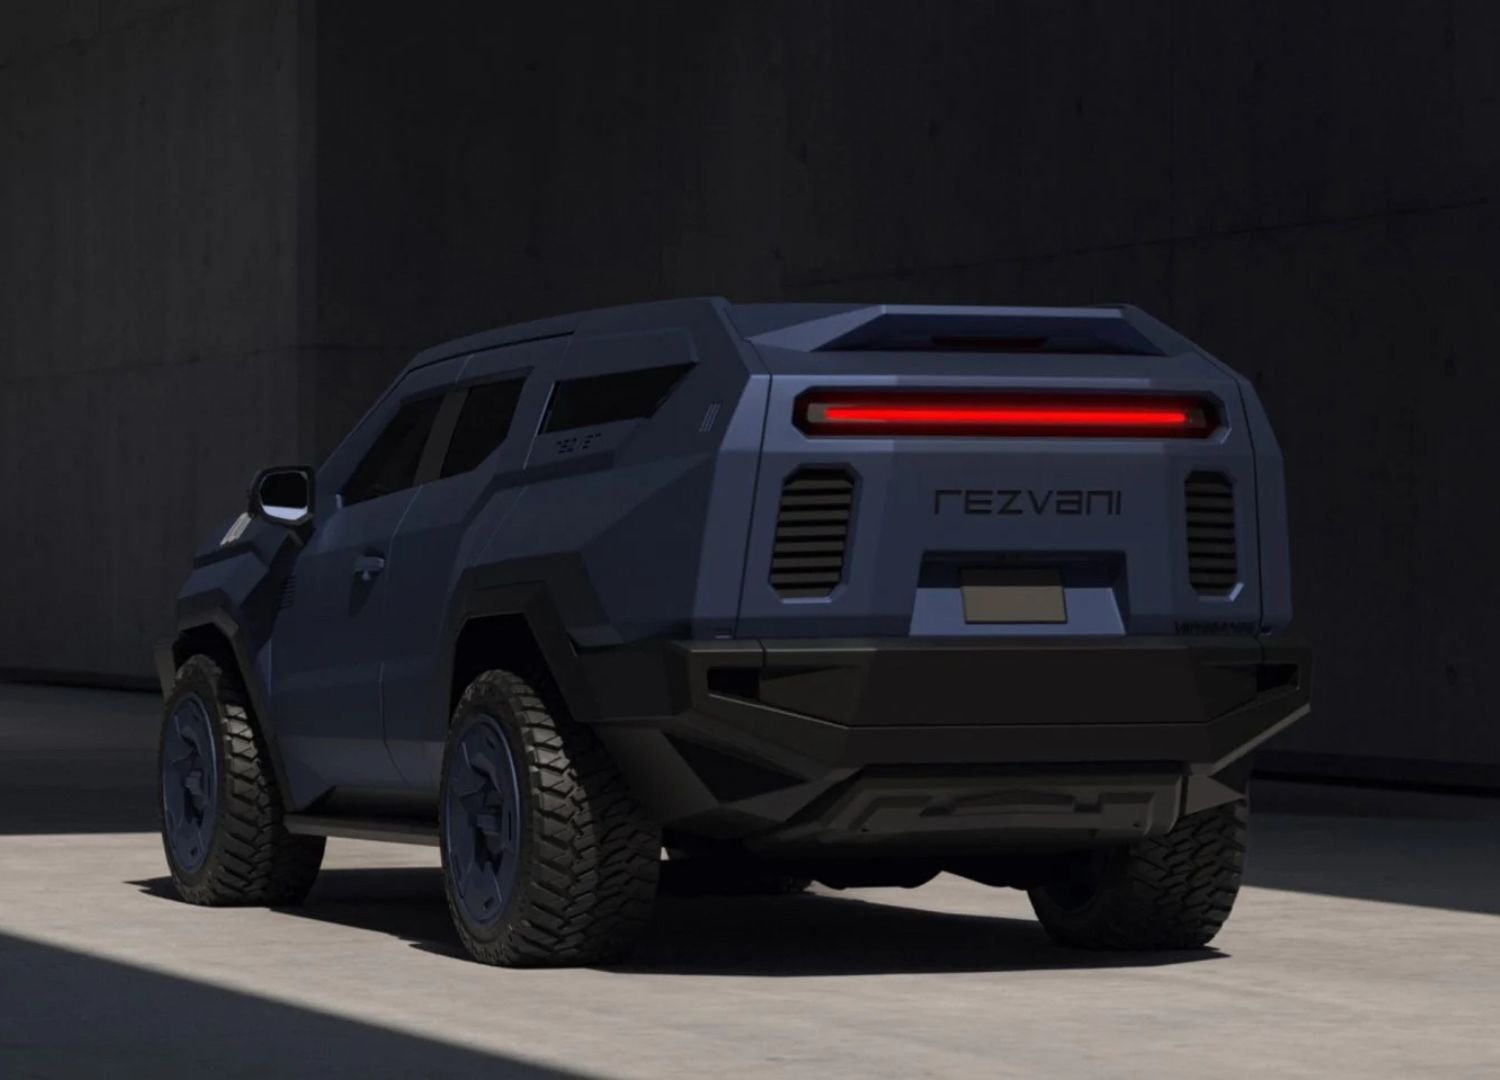 Rezvani Vengeance by Rezvani Motors / Five eclectic concept cars that bring humans and machines together